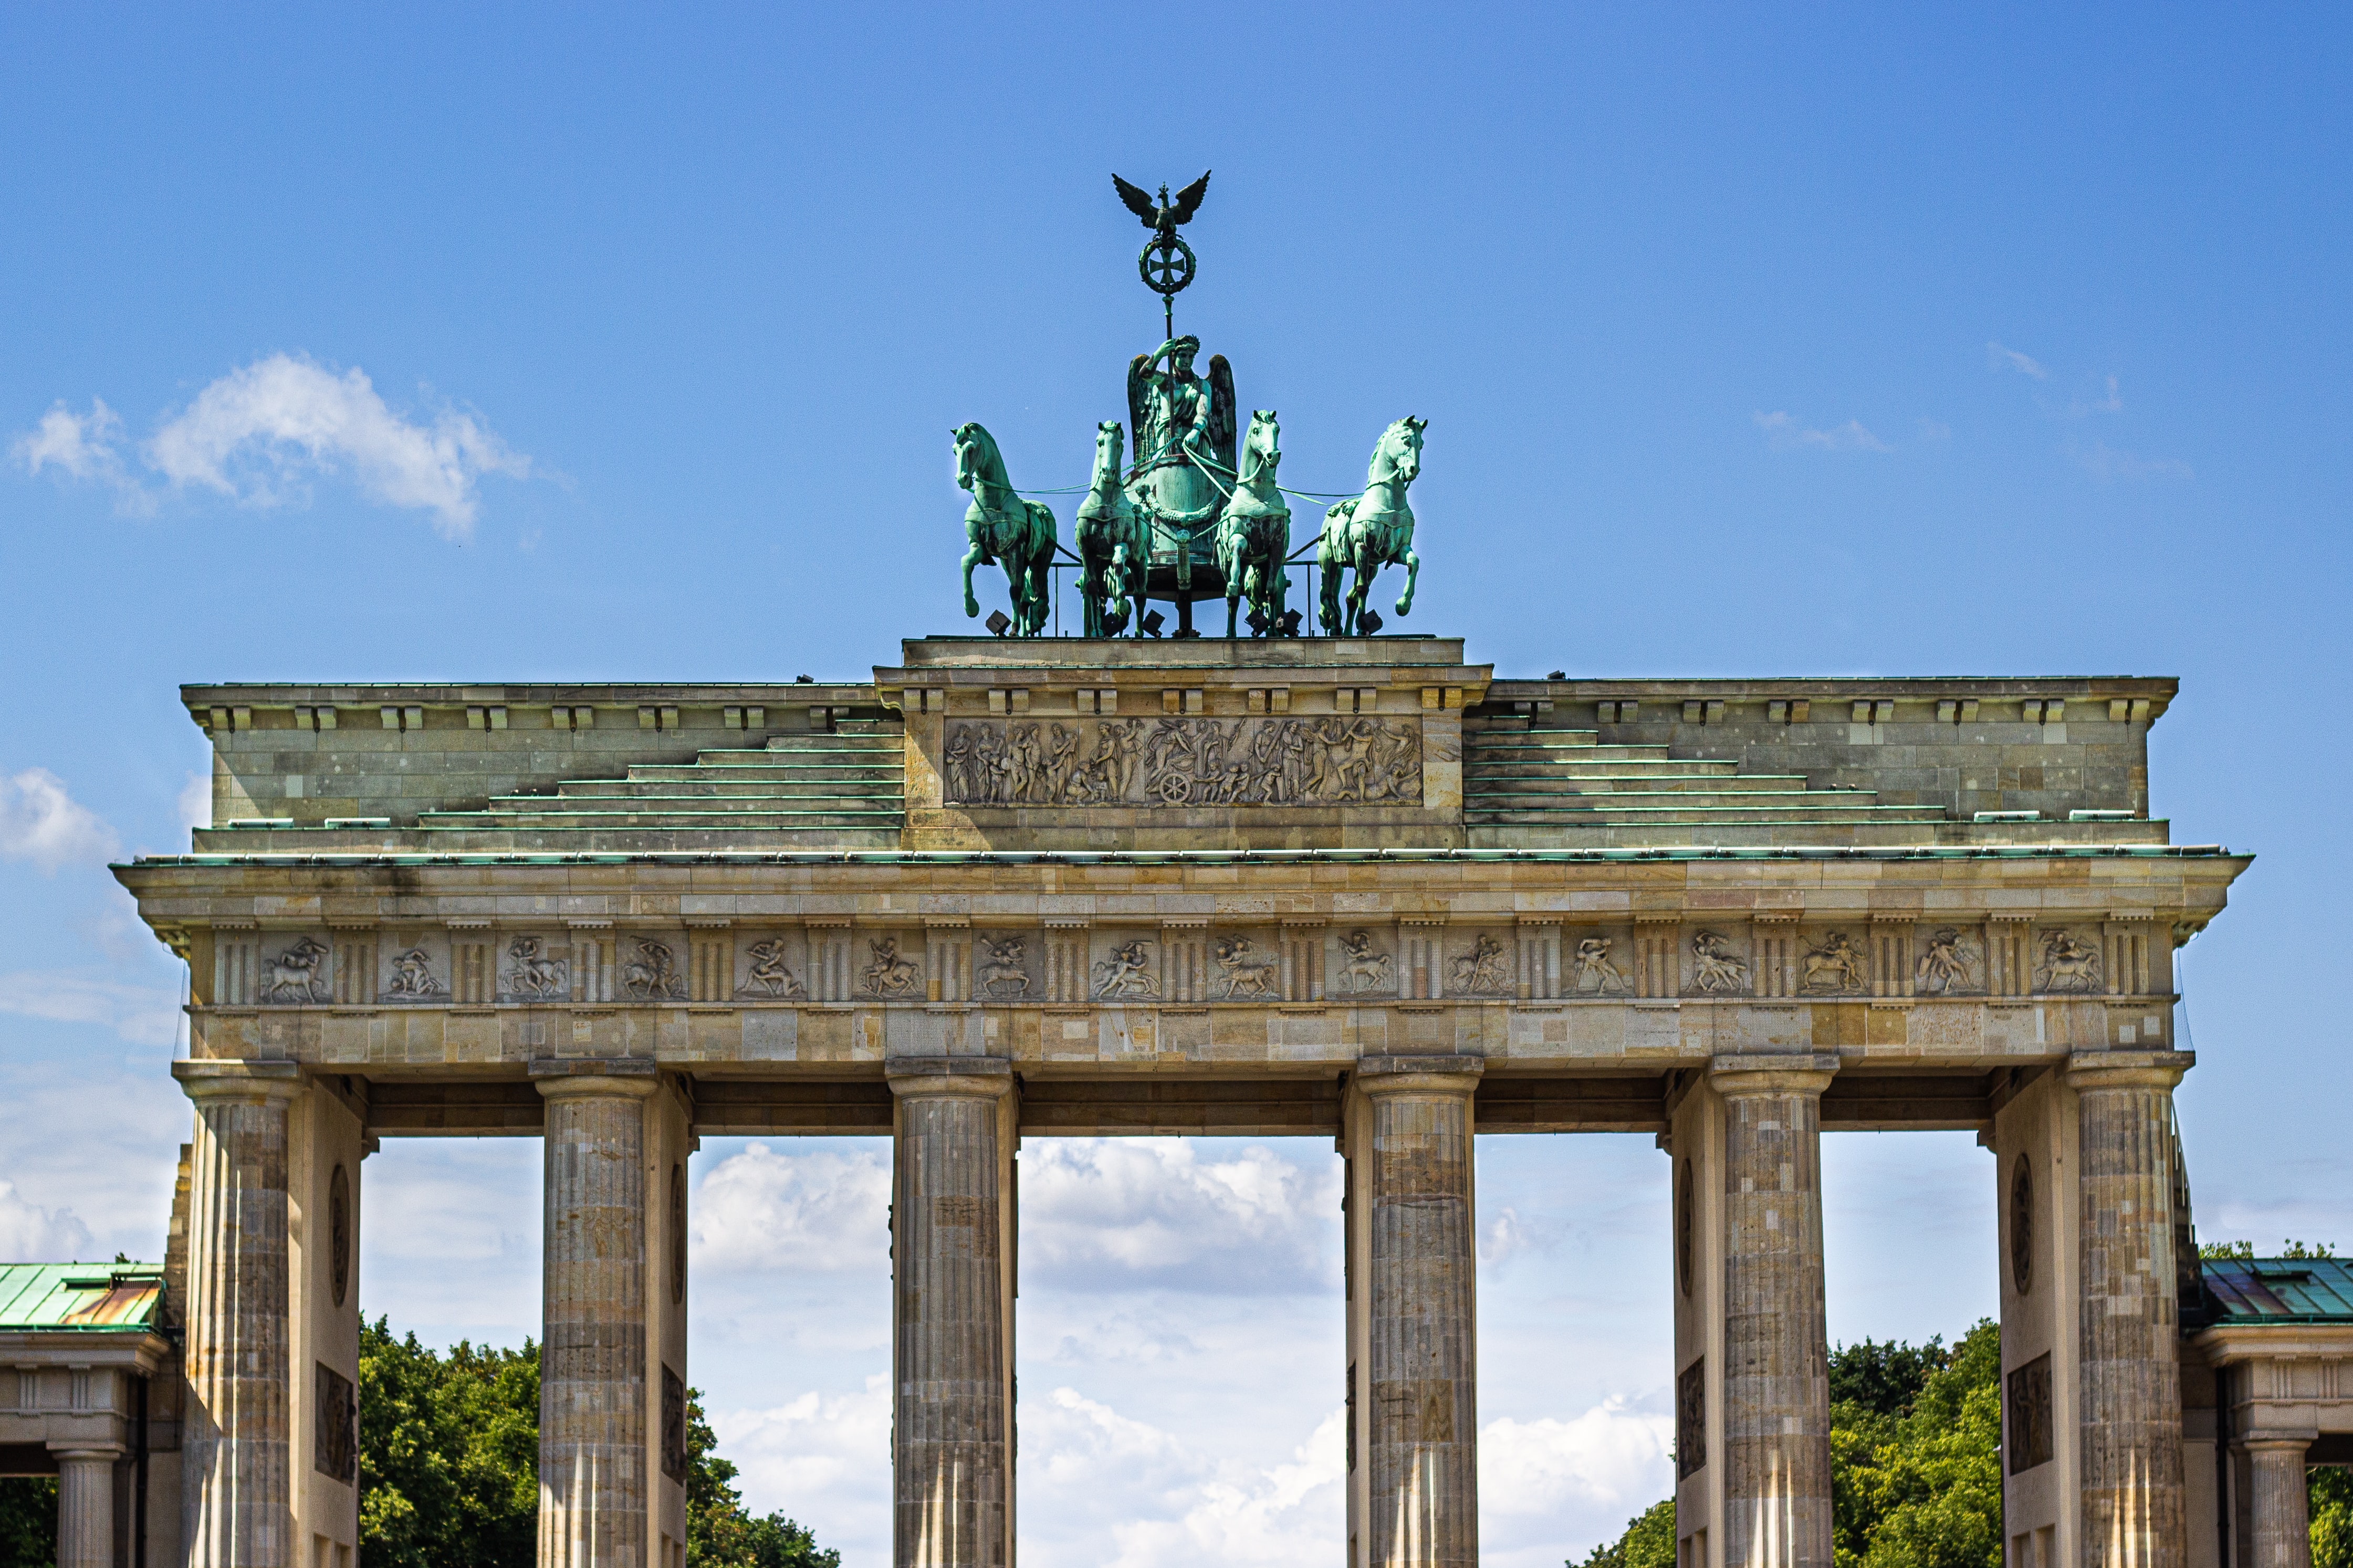 a large stone structure with statues on top with Brandenburg Gate in the background